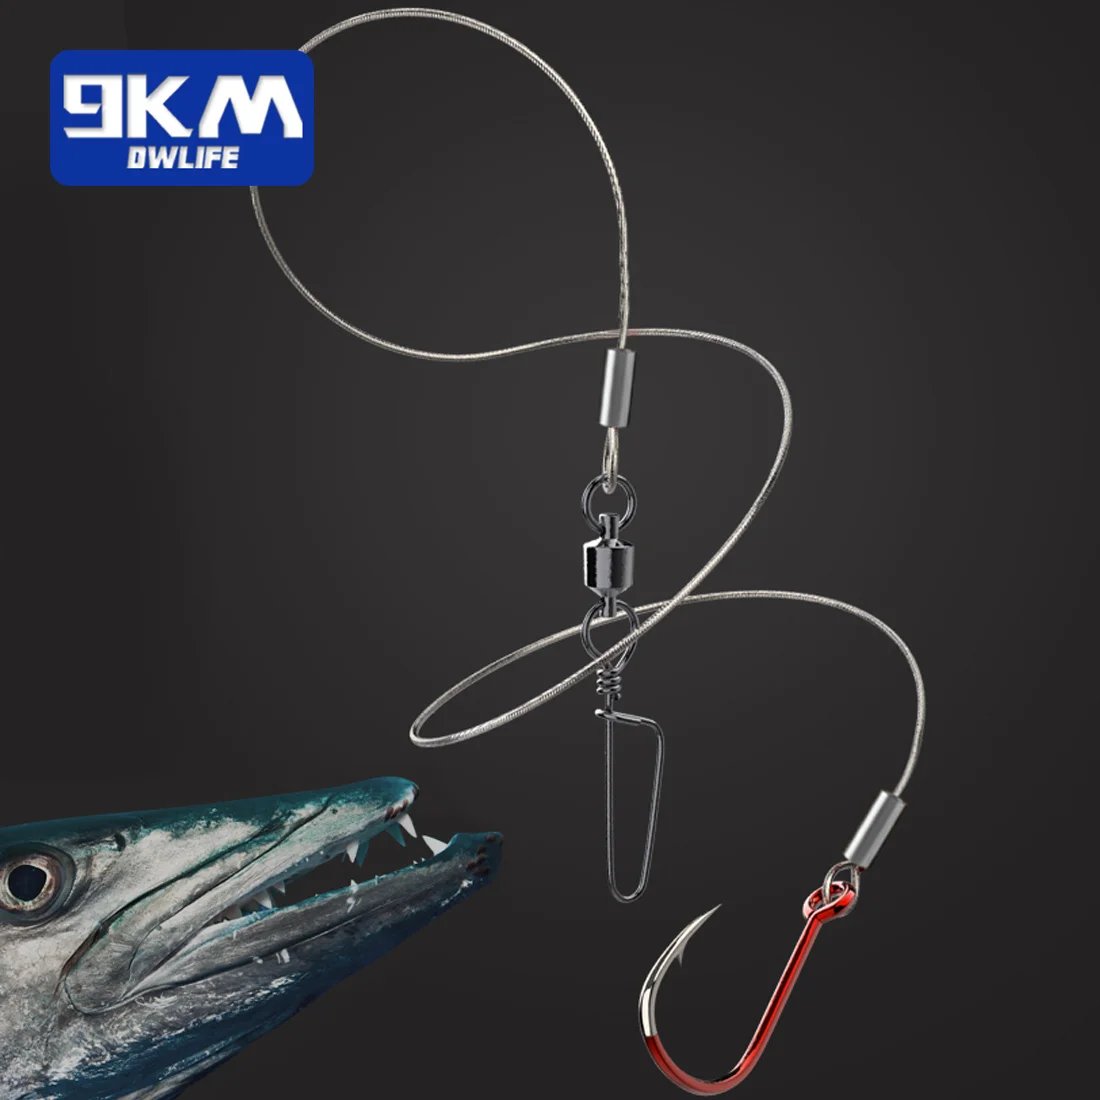 9KM 7 Strands Fishing Wire Stainless Steel Wire 10M Trolling Wire Fishing Lures Hooks Connect Tackle with 20pcs Crimp Sleeves